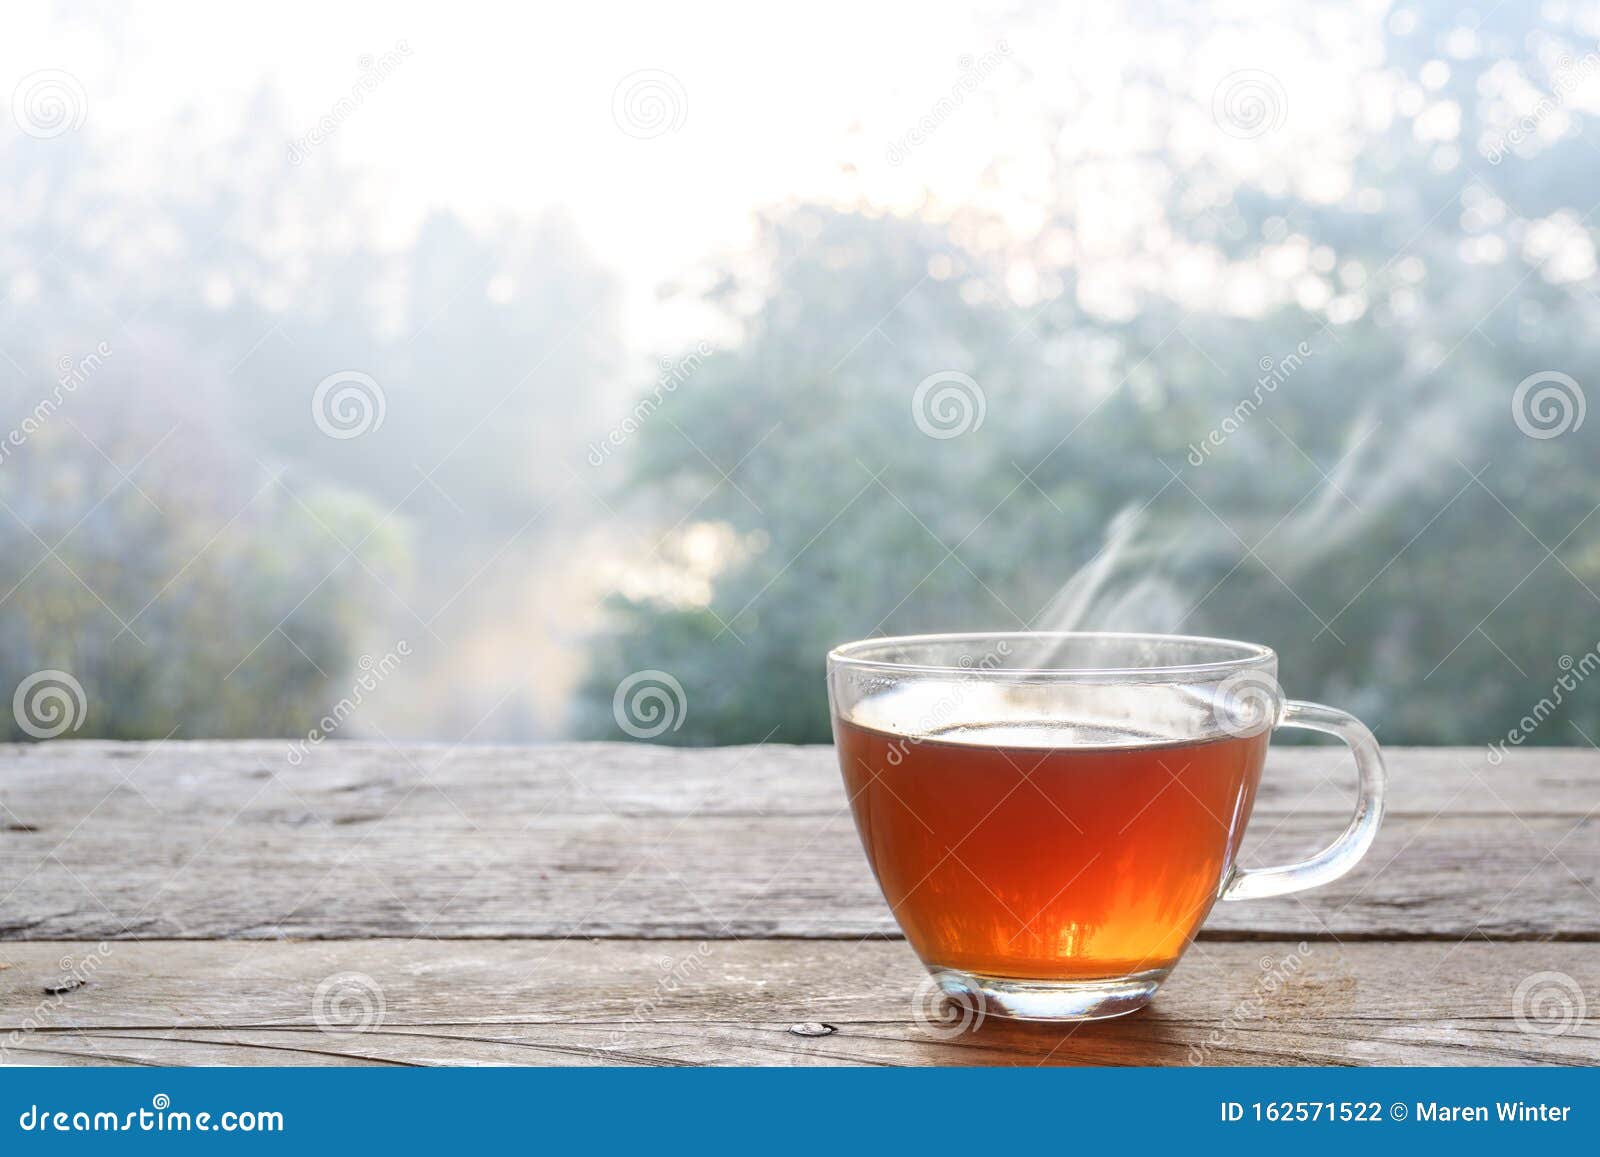 hot steaming tea in a glass cup on a rustic wooden outdoor table on a cold foggy winter day, copy space, selected focus, narrow